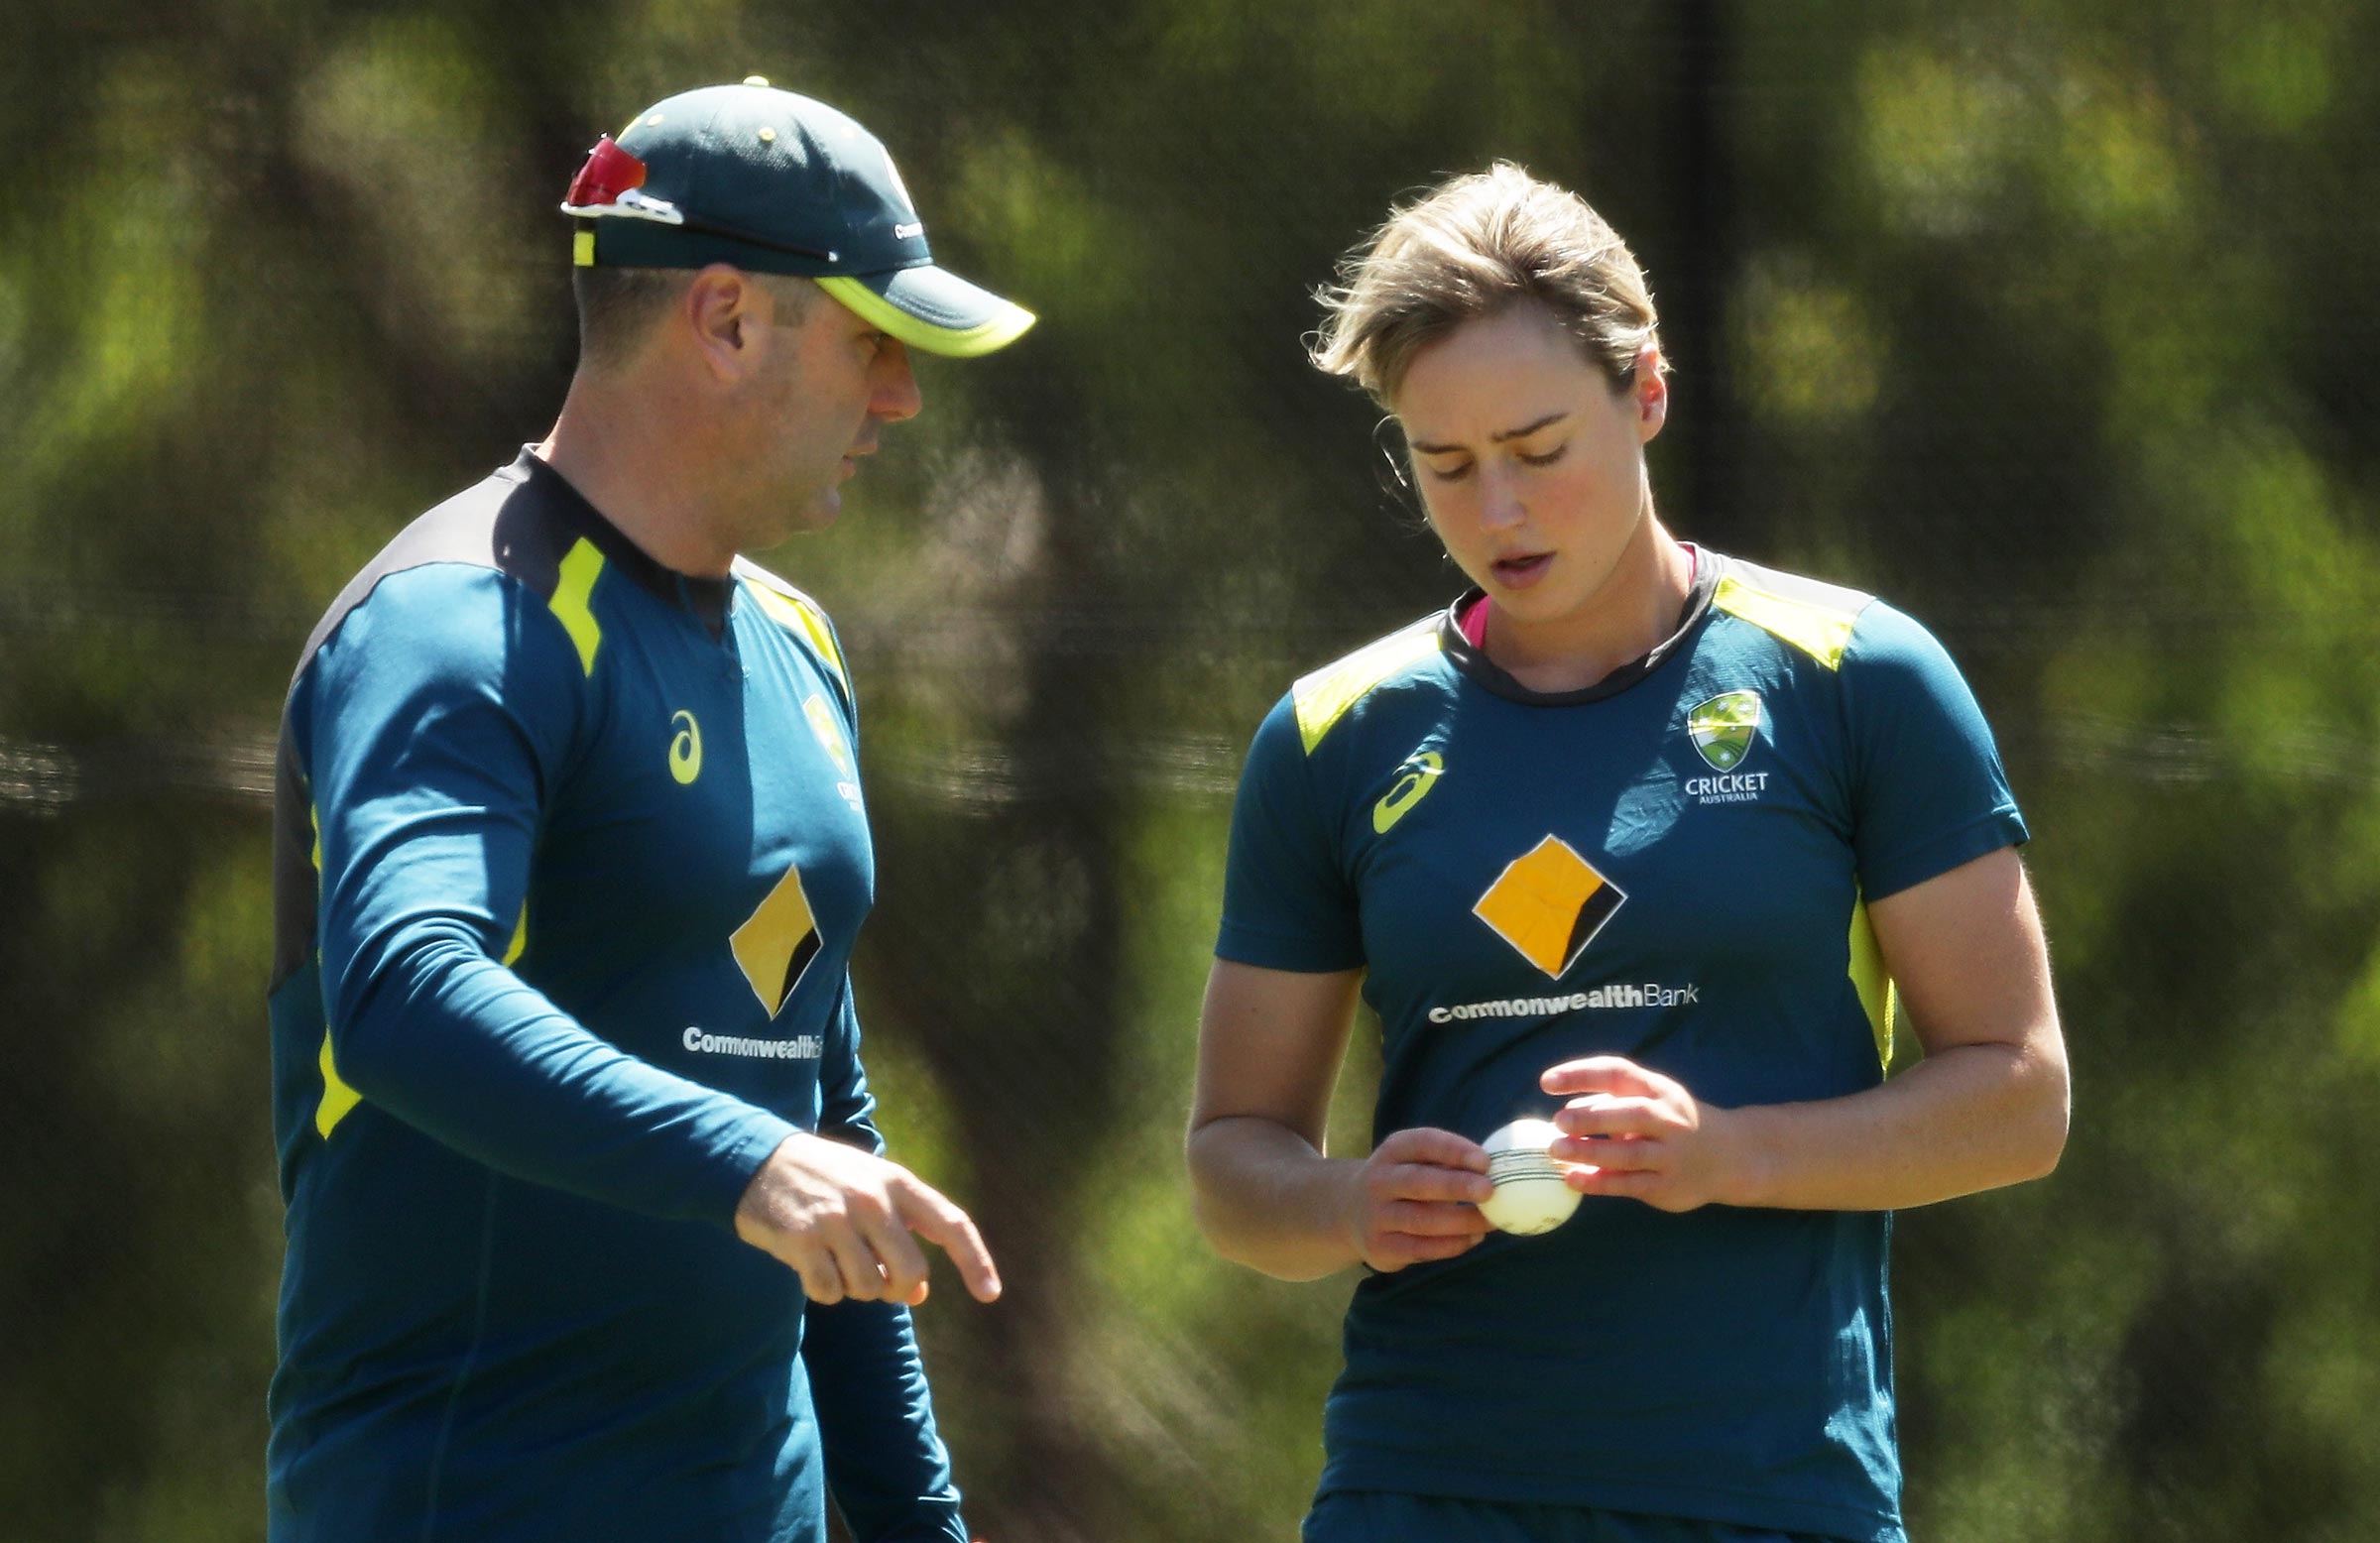 Ben Sawyer and Ellyse Perry (Image Credits: Twitter)